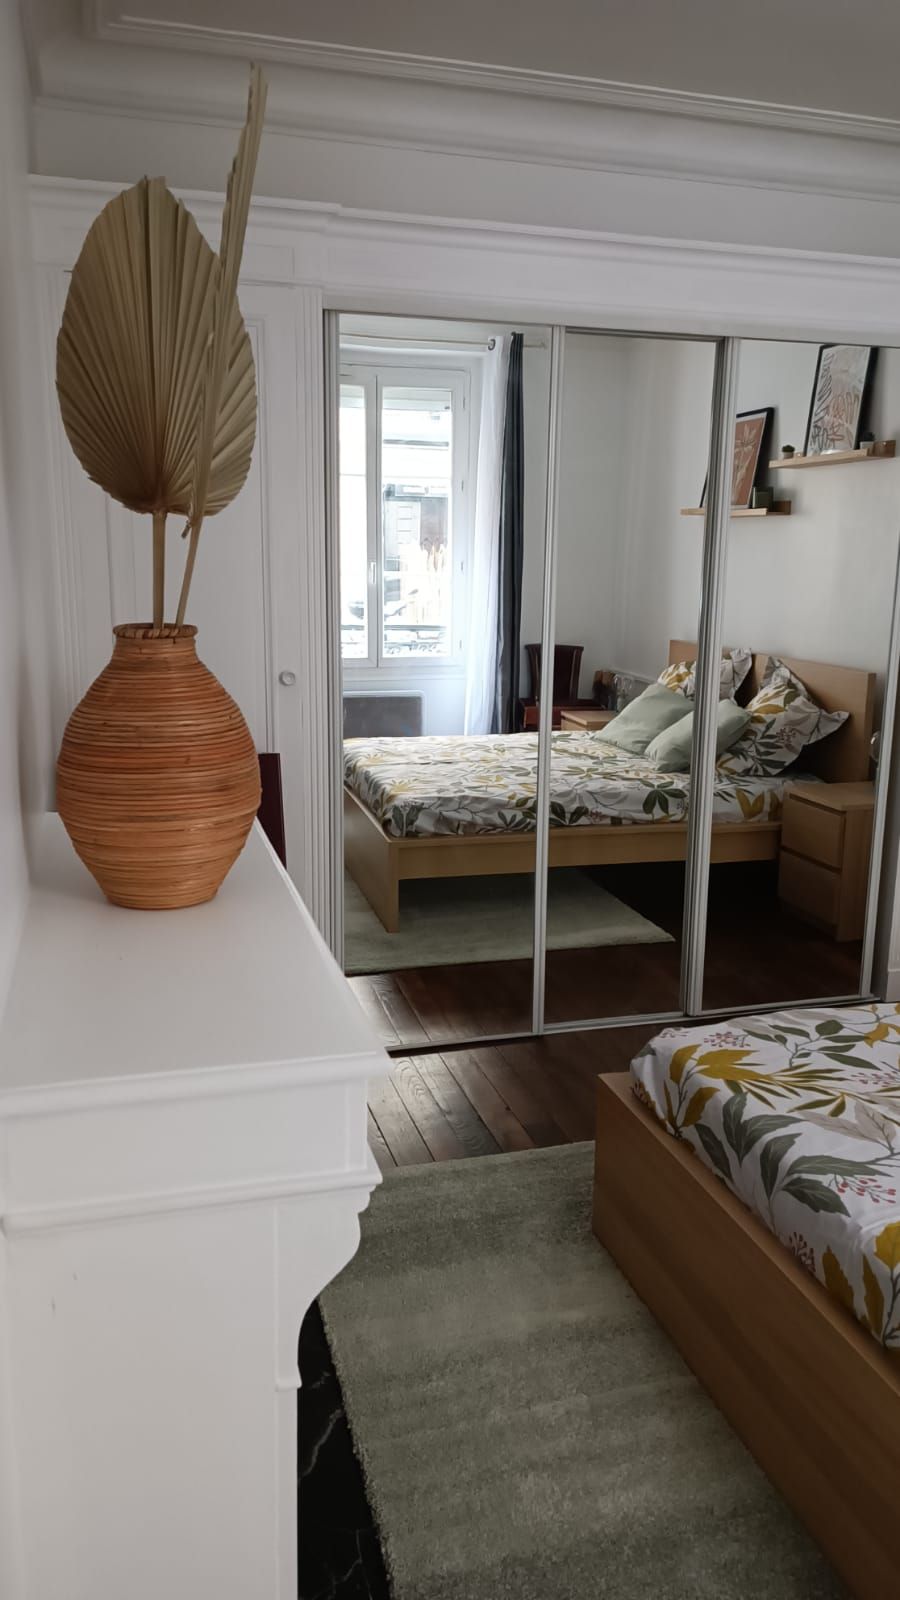 Furnished flat in the heart of Paris (16e)